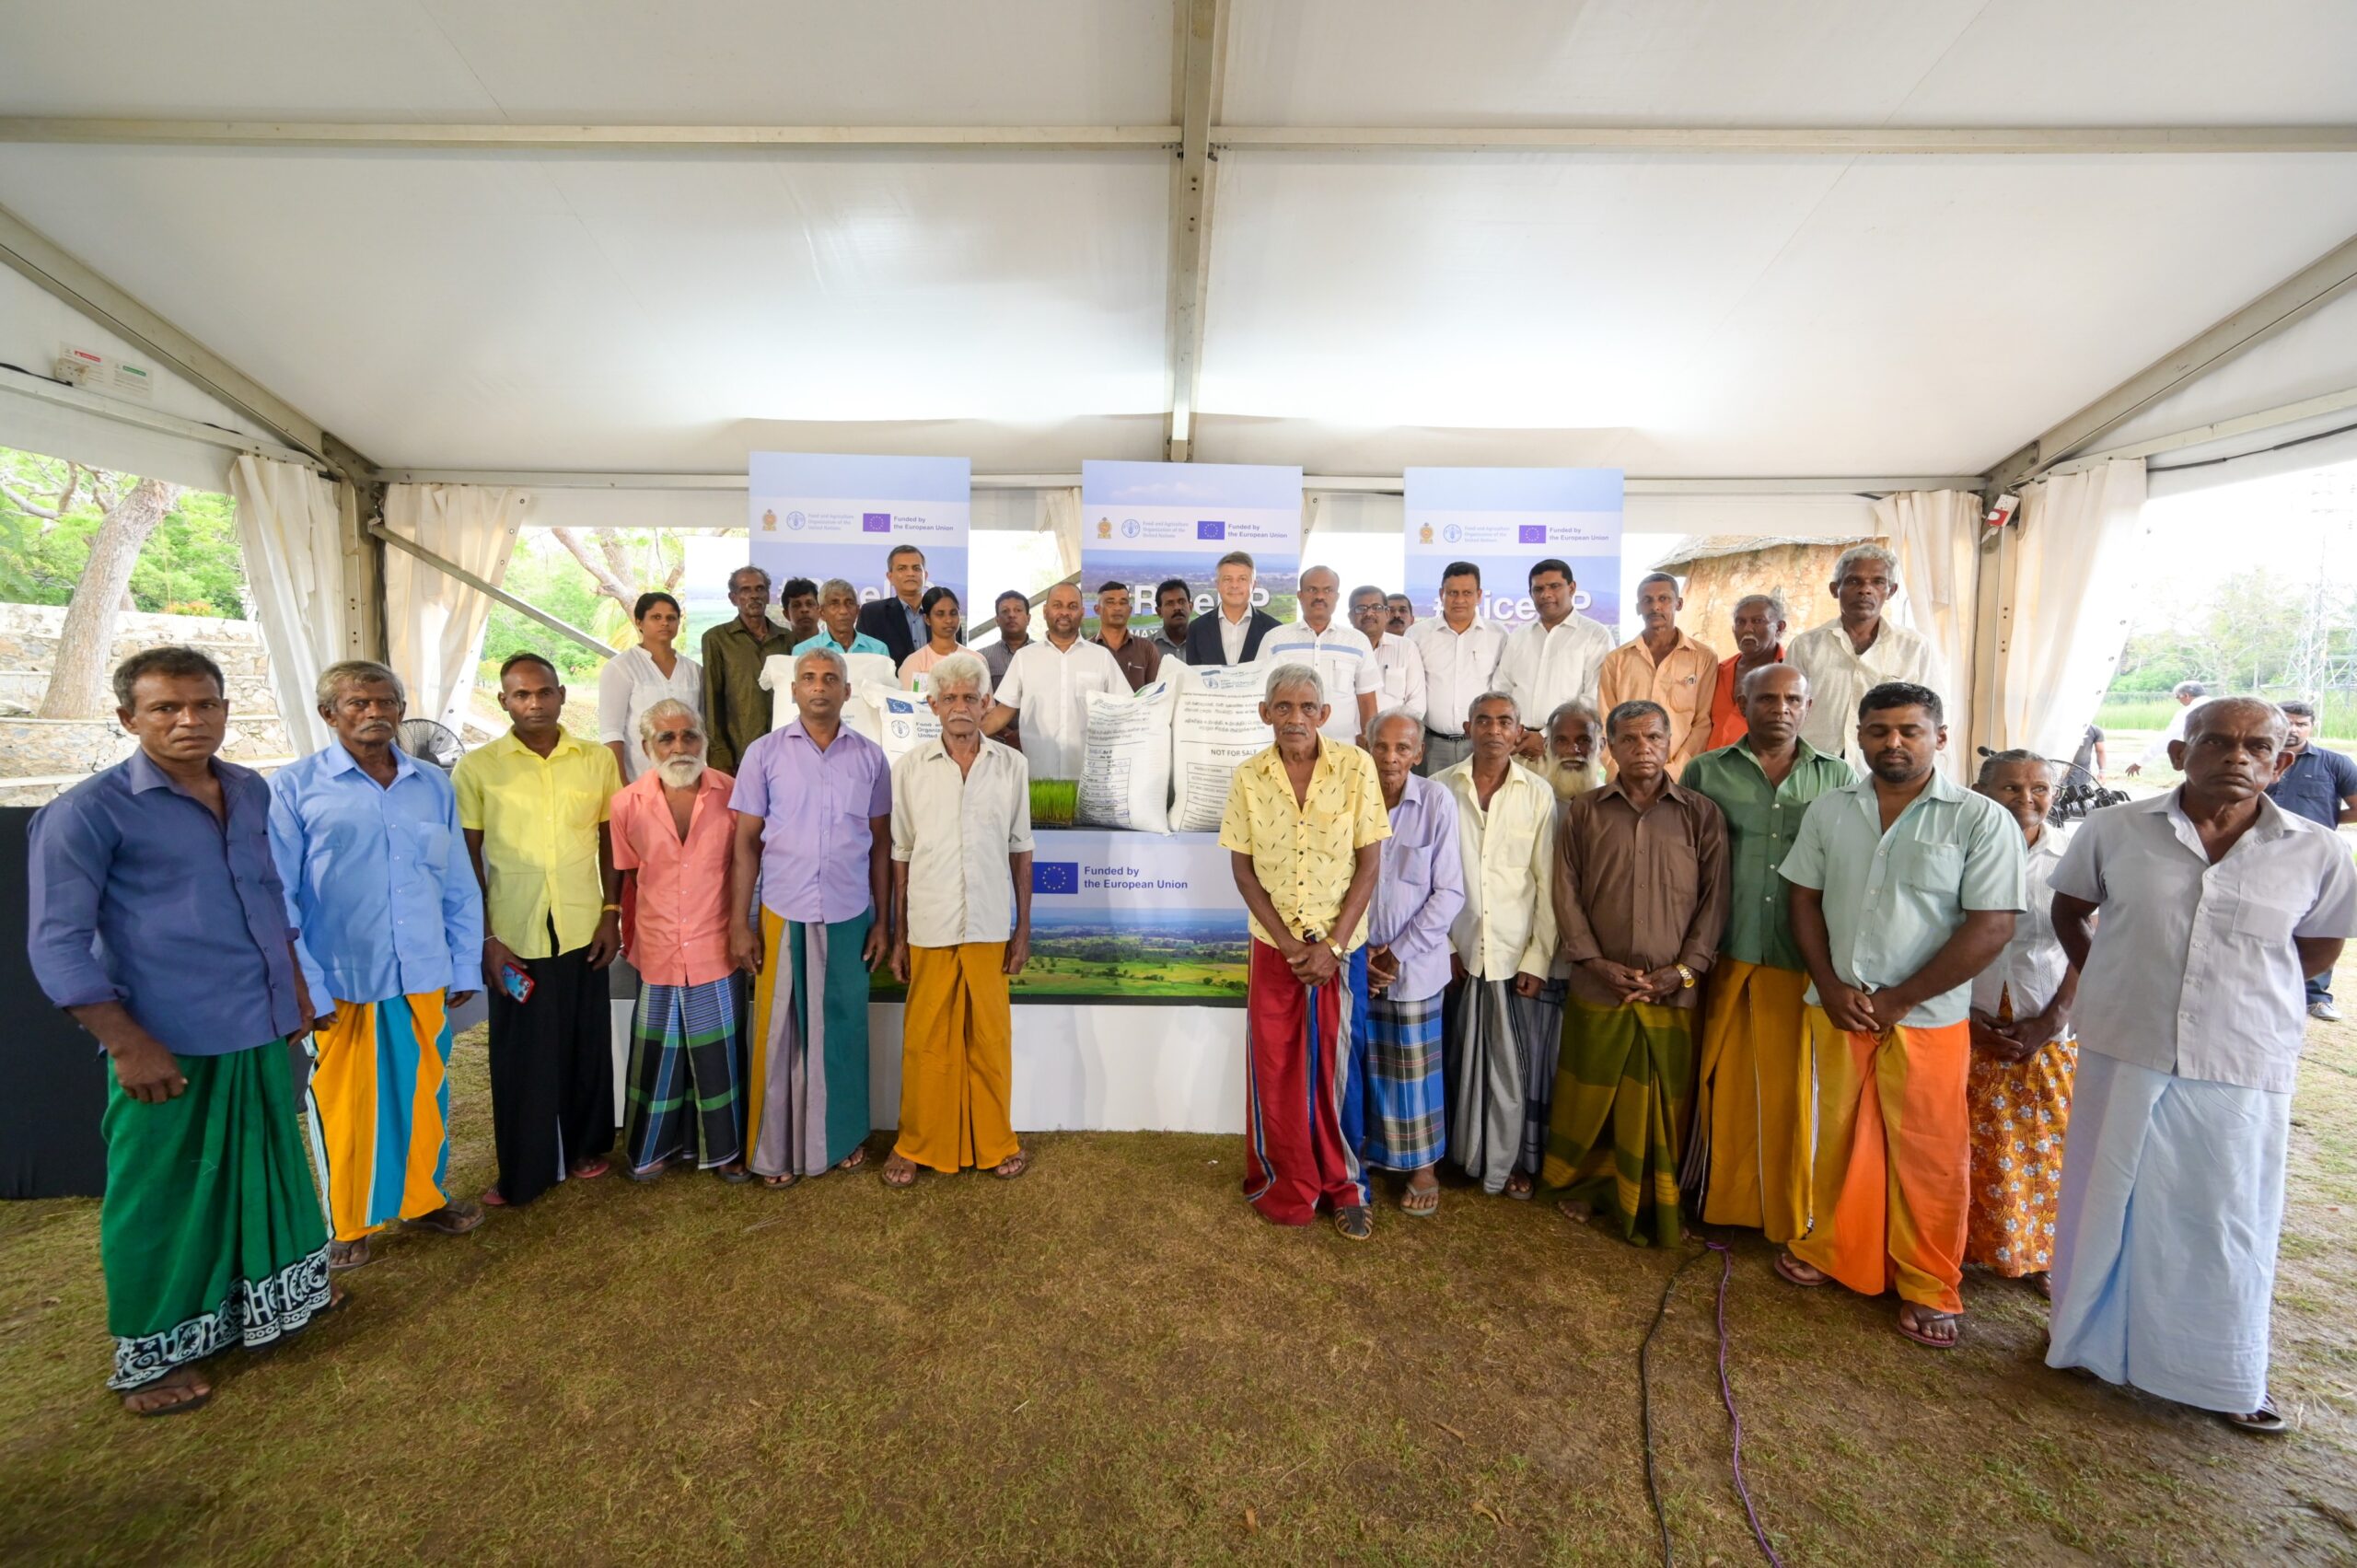 European Union and FAO launch a four million euro initiative to improve efficiency and sustainability of paddy farming in Sri Lanka